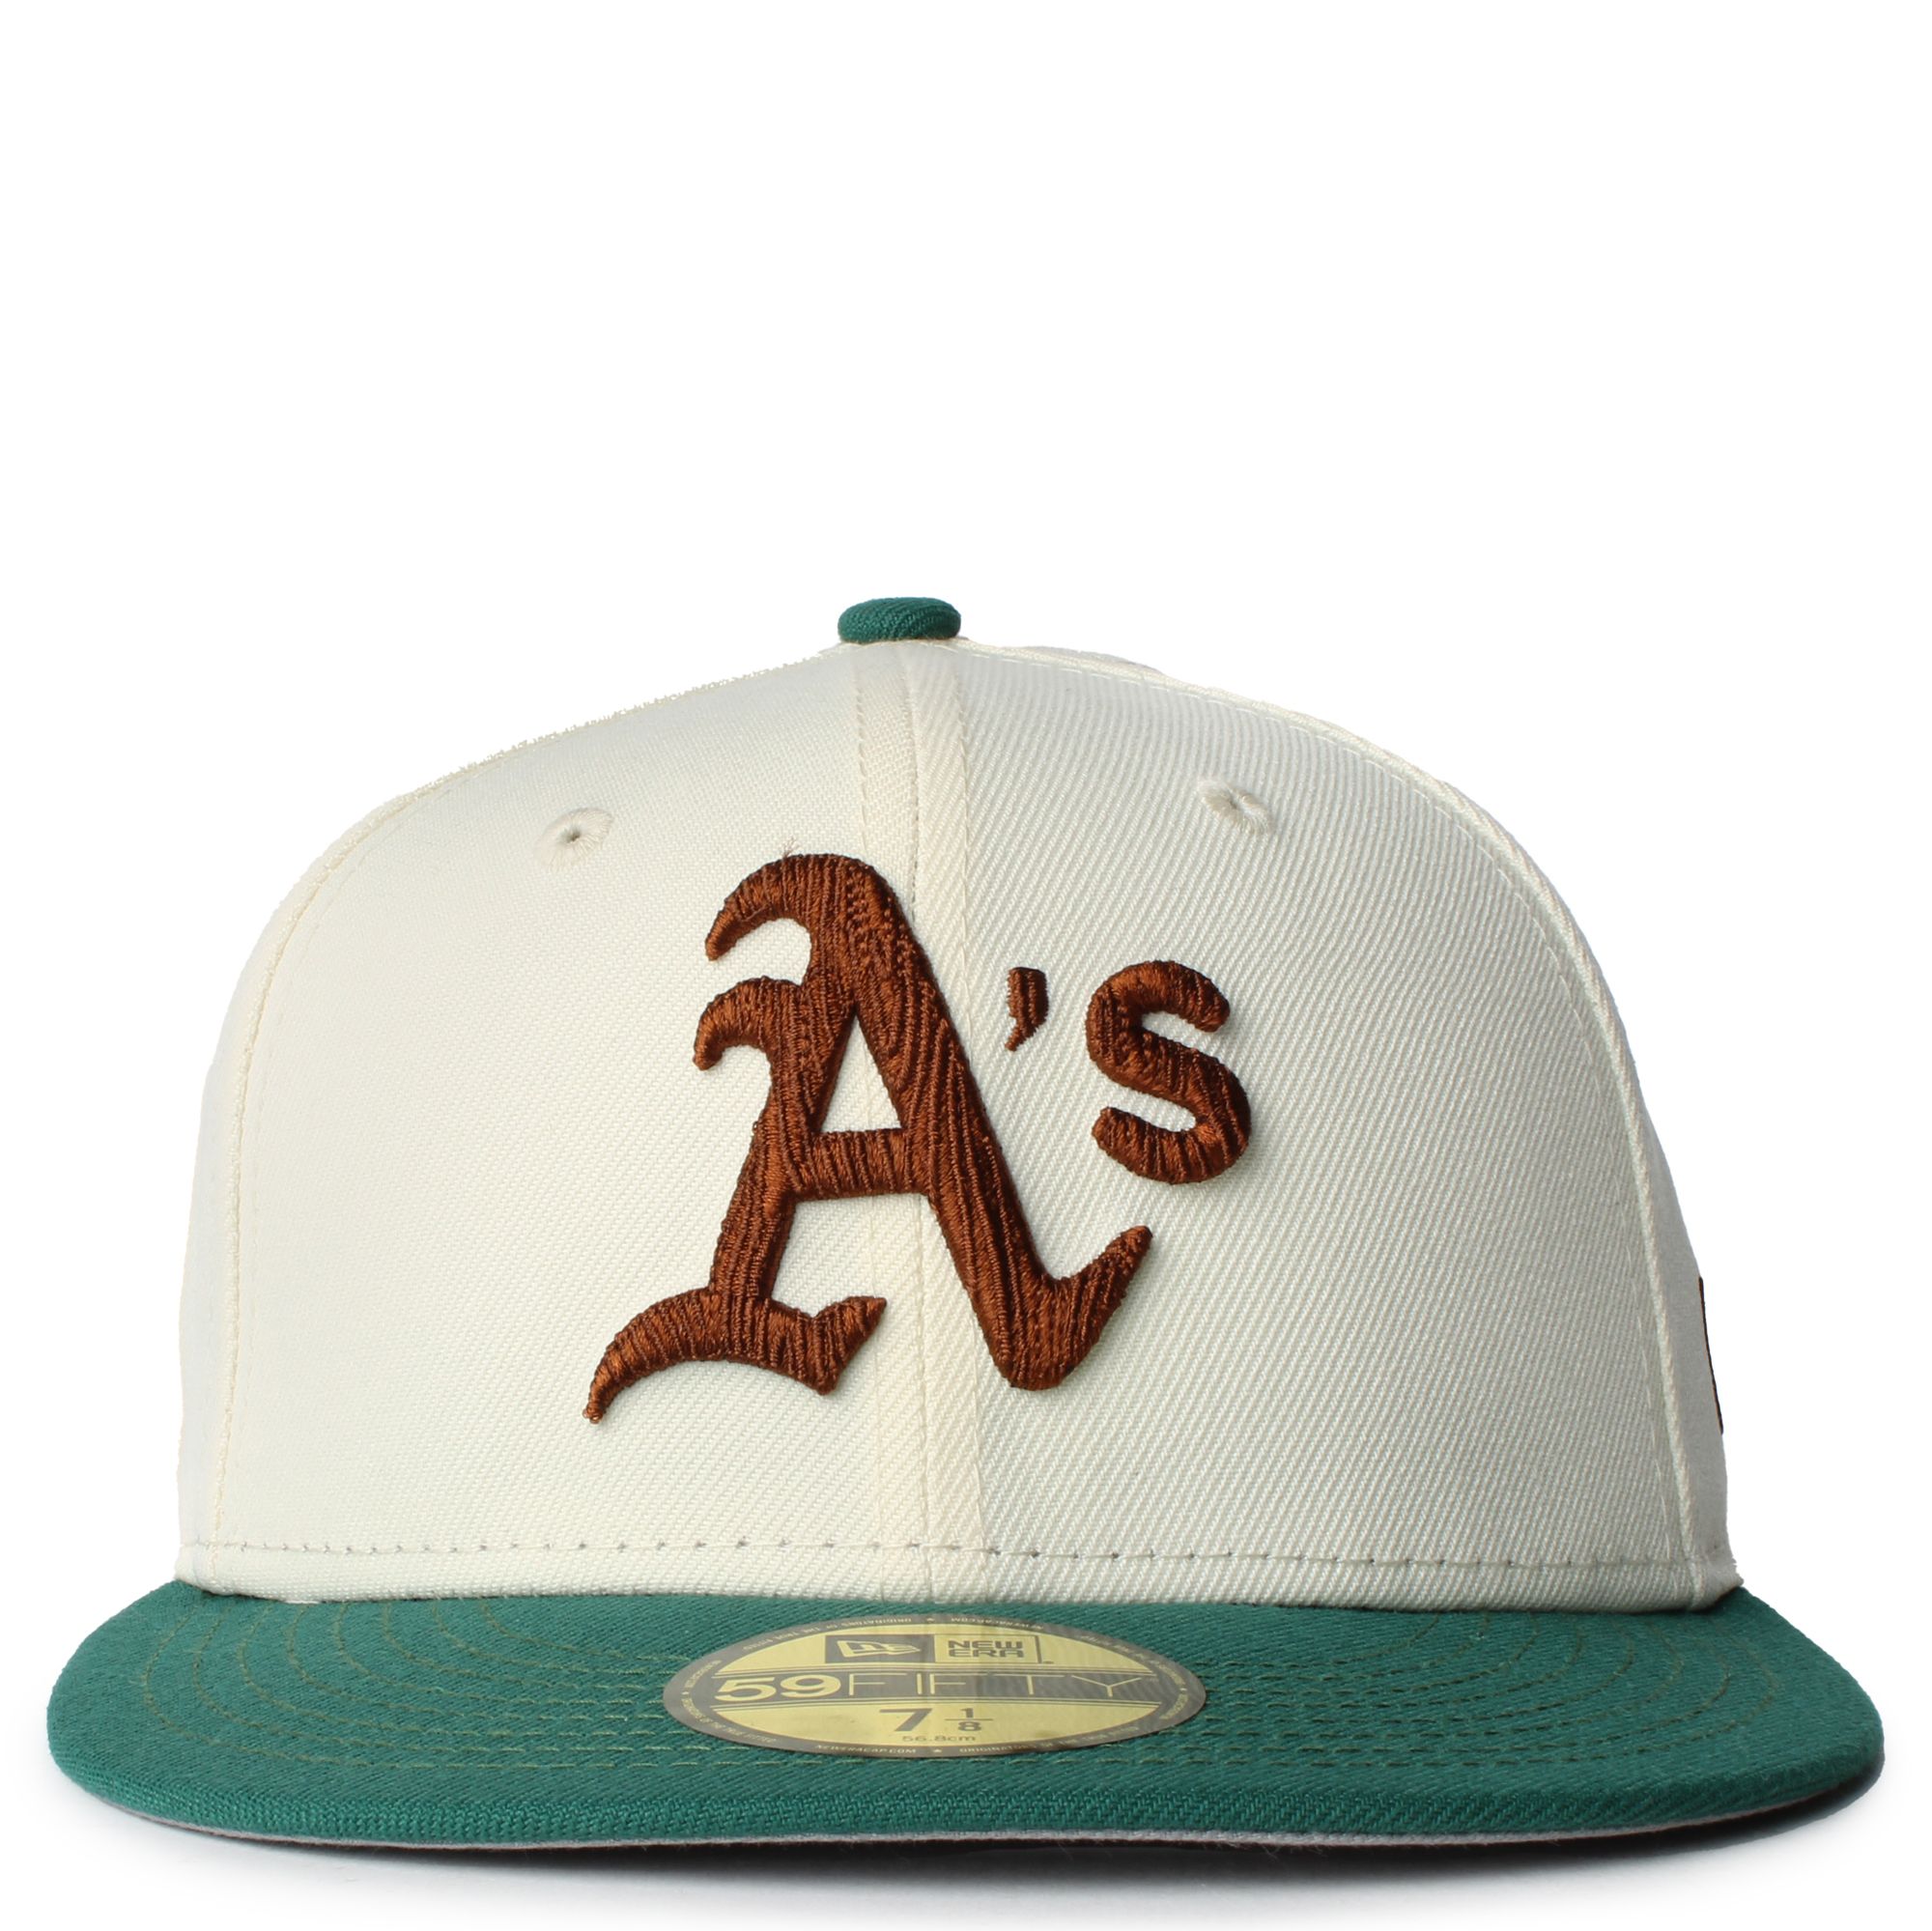 New Era Caps Oakland Athletics Camp Fitted Hat Beige/Green